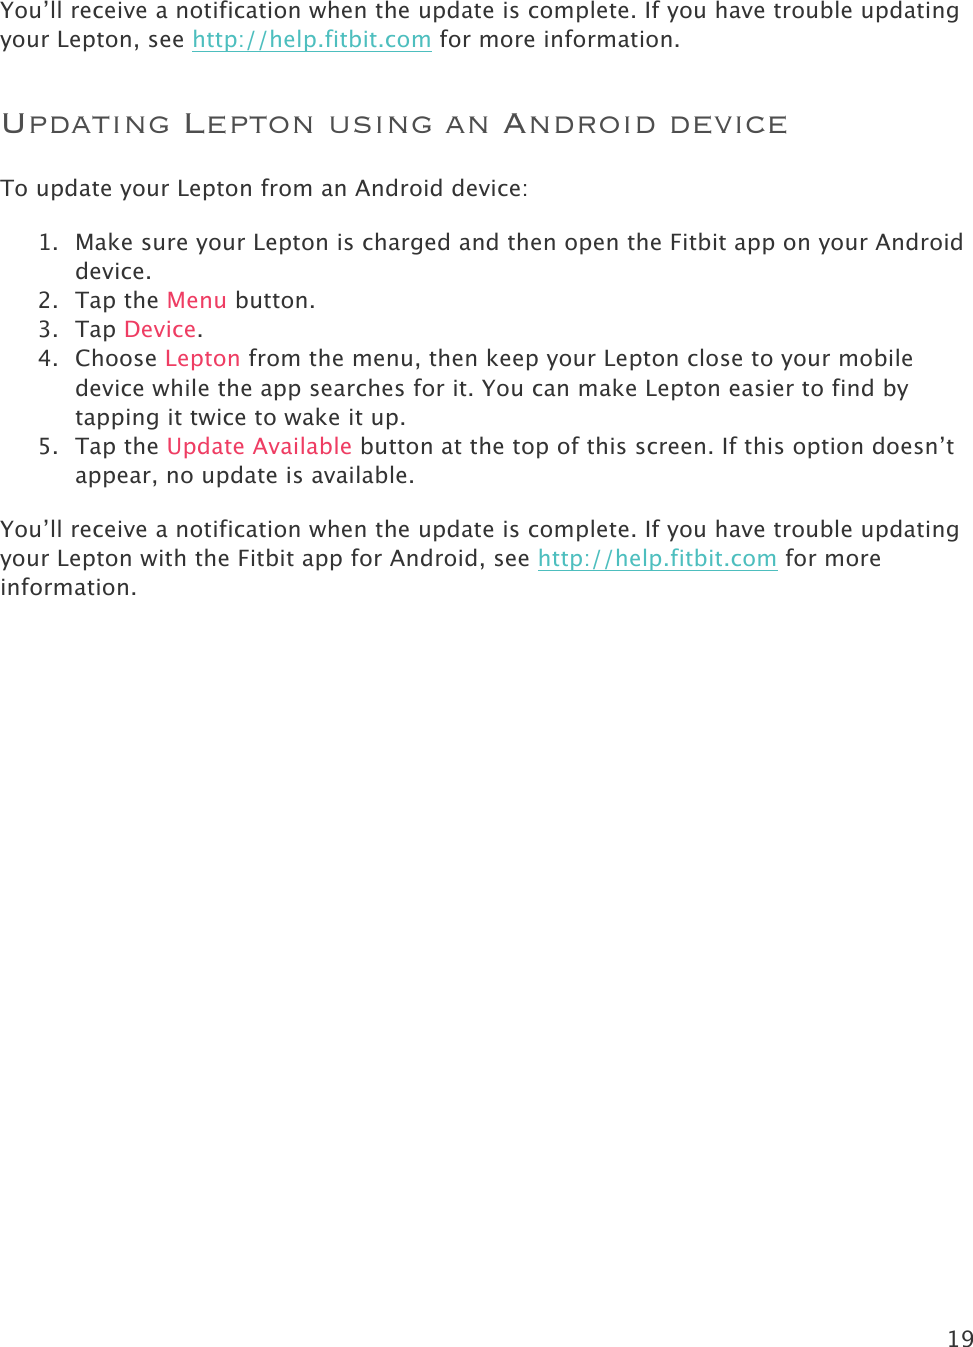 19   You’ll receive a notification when the update is complete. If you have trouble updating your Lepton, see http://help.fitbit.com for more information.  Updating Lepton using an Android device To update your Lepton from an Android device: 1. Make sure your Lepton is charged and then open the Fitbit app on your Android device.  2. Tap the Menu button. 3. Tap Device. 4. Choose Lepton from the menu, then keep your Lepton close to your mobile device while the app searches for it. You can make Lepton easier to find by tapping it twice to wake it up. 5. Tap the Update Available button at the top of this screen. If this option doesn’t appear, no update is available. You’ll receive a notification when the update is complete. If you have trouble updating your Lepton with the Fitbit app for Android, see http://help.fitbit.com for more information.  